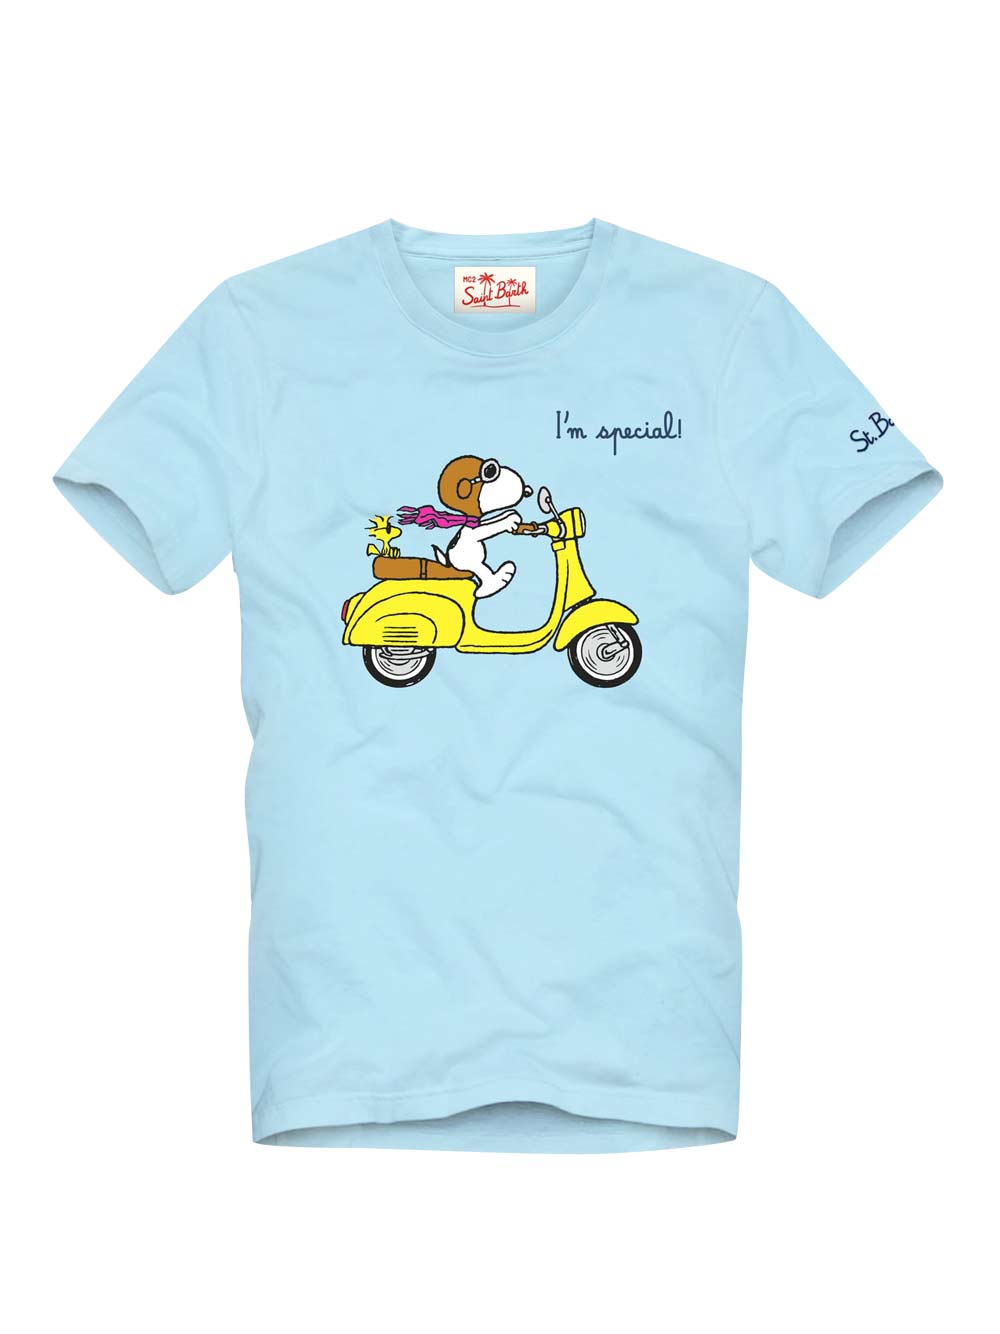 Snoopy Special T-Shirt